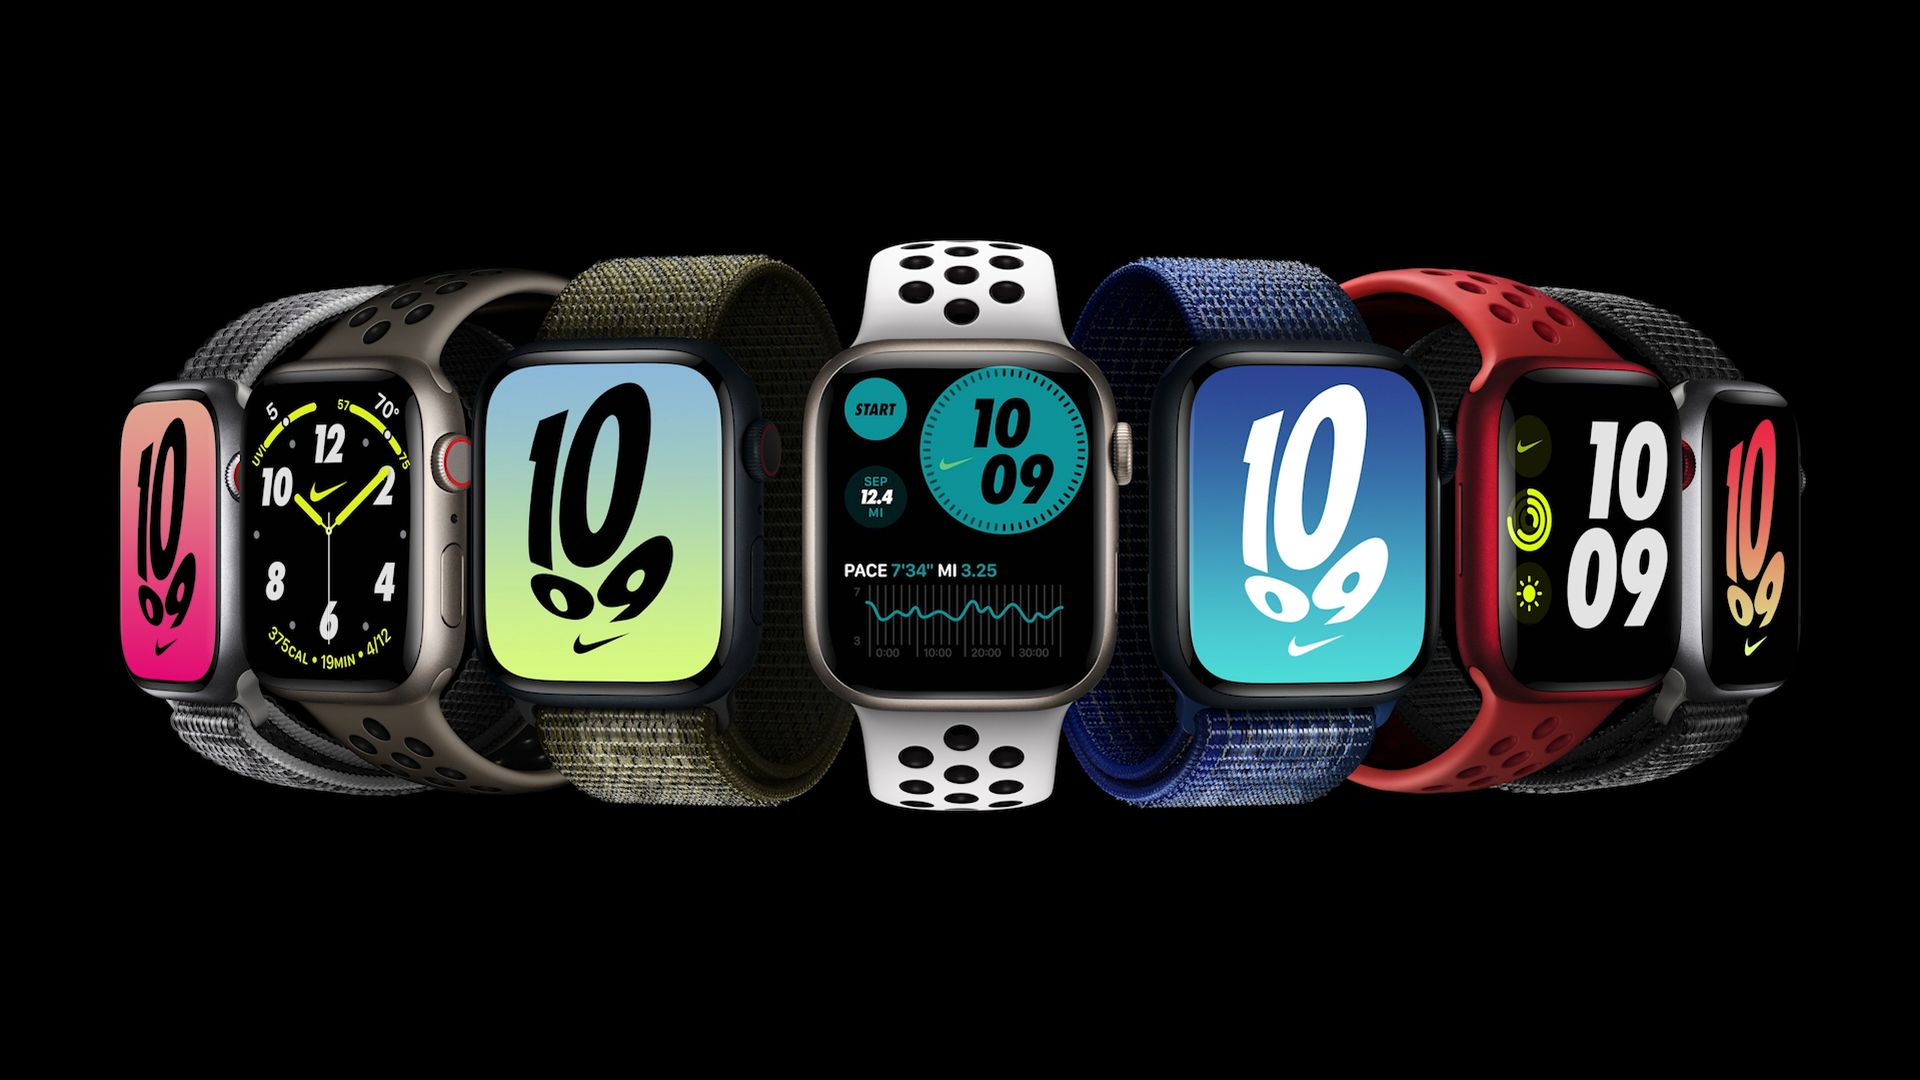 Apple Watch Series 8 is introduced: Specs, price and release date